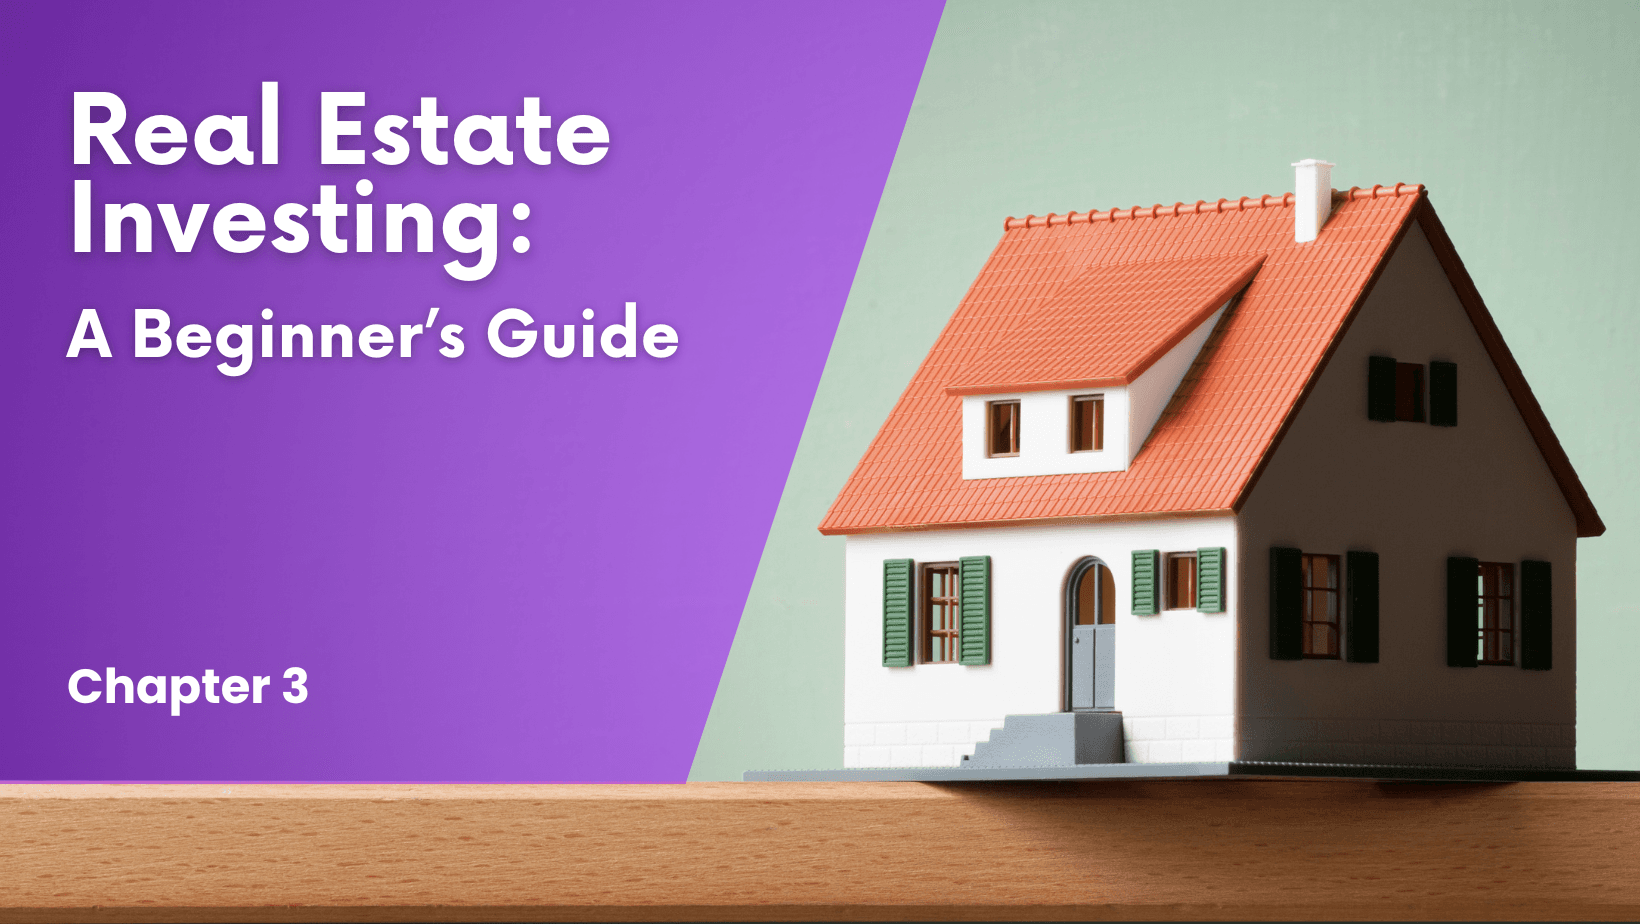 Chapter 3: Financial Planning for Real Estate Investment